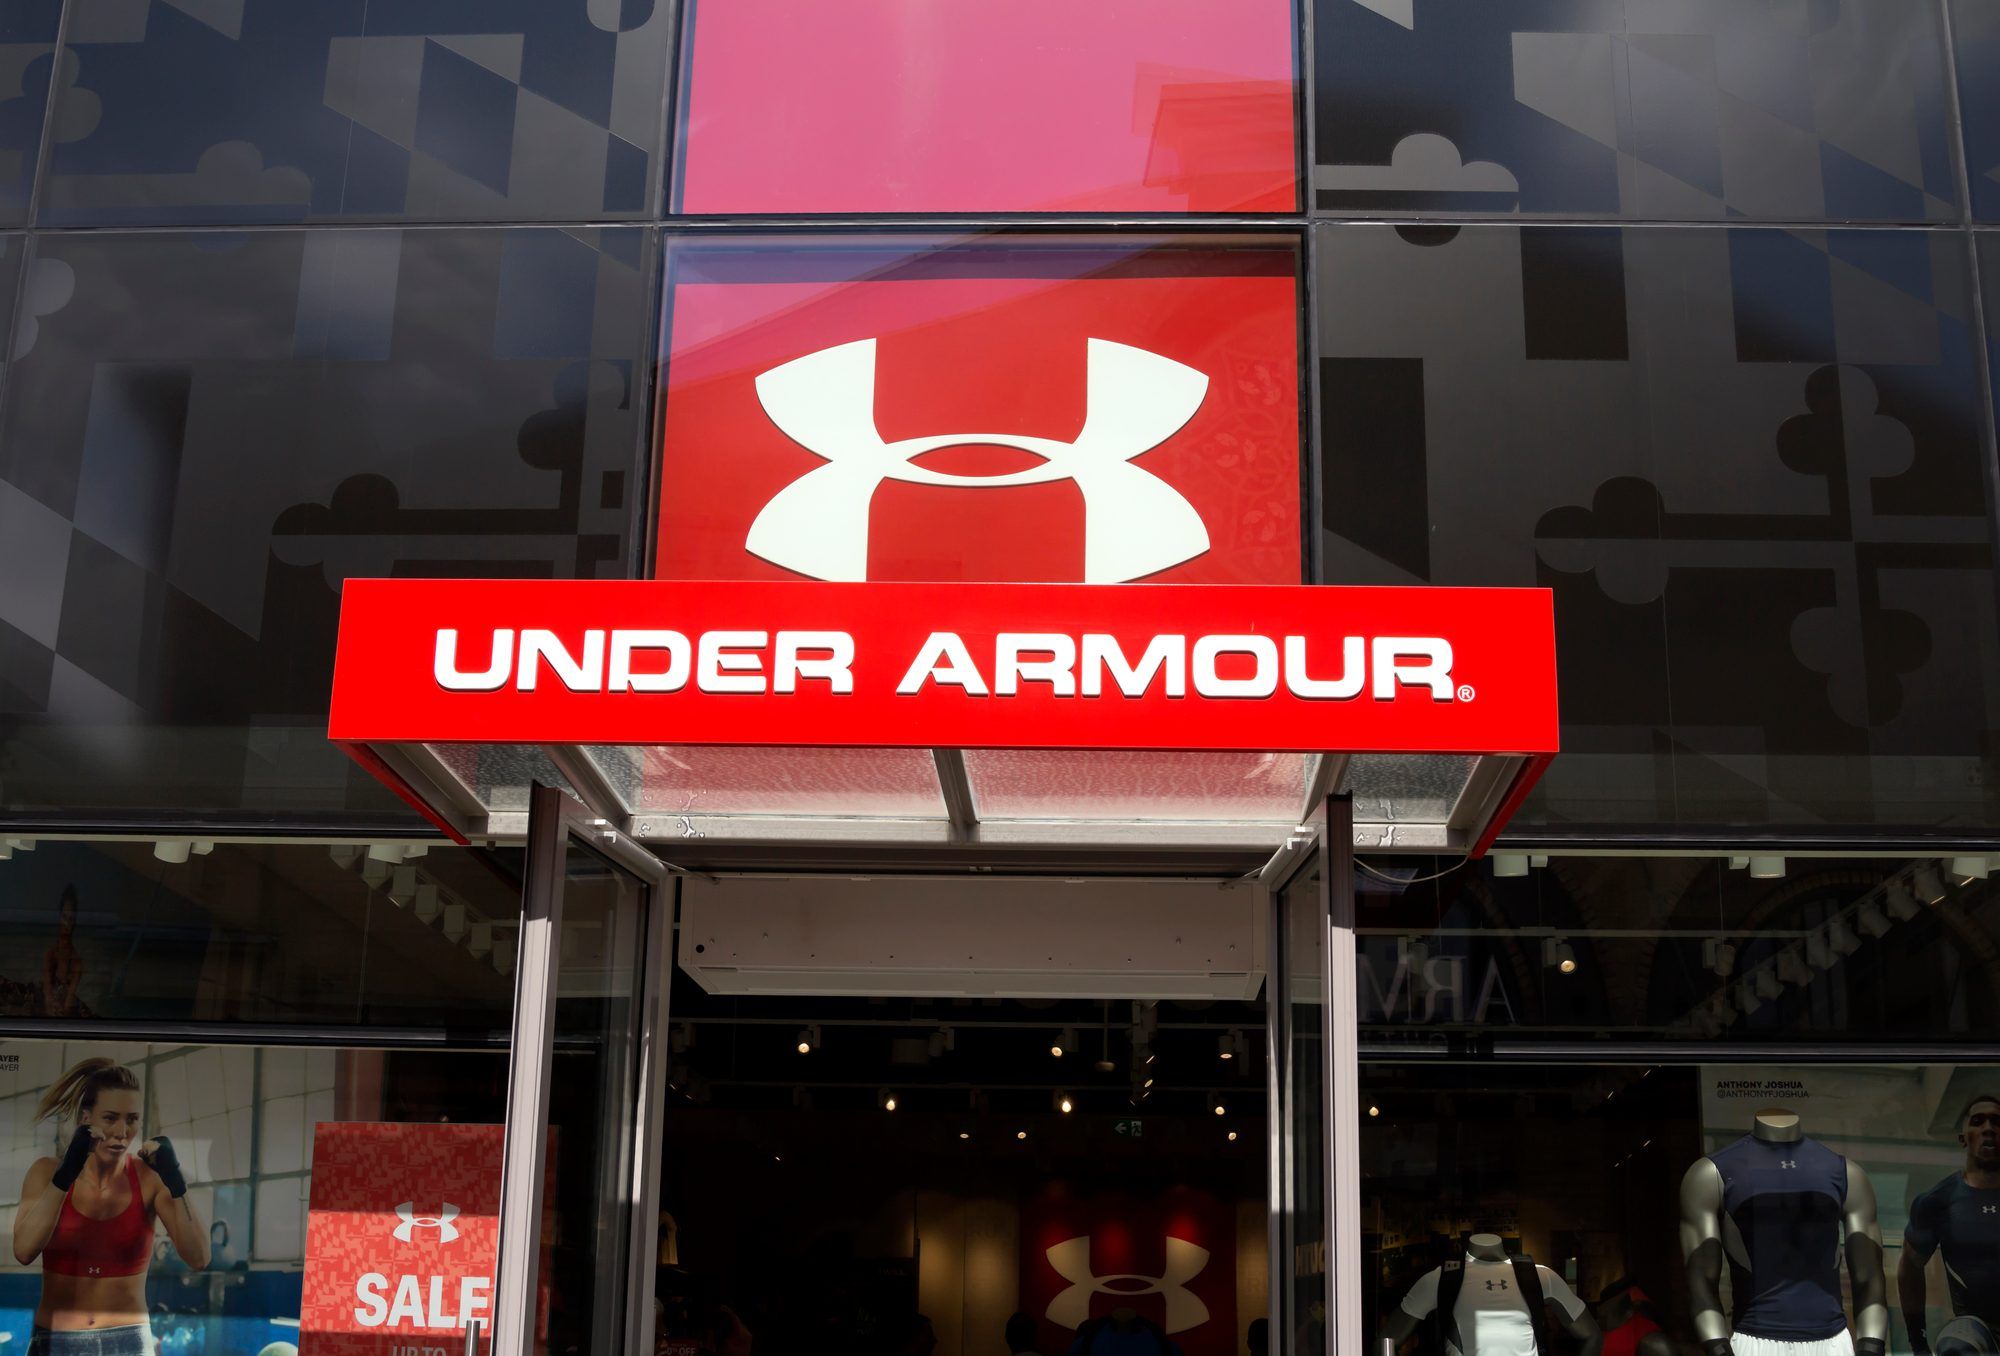 Under Armour sued over claims about Rush workout fabric